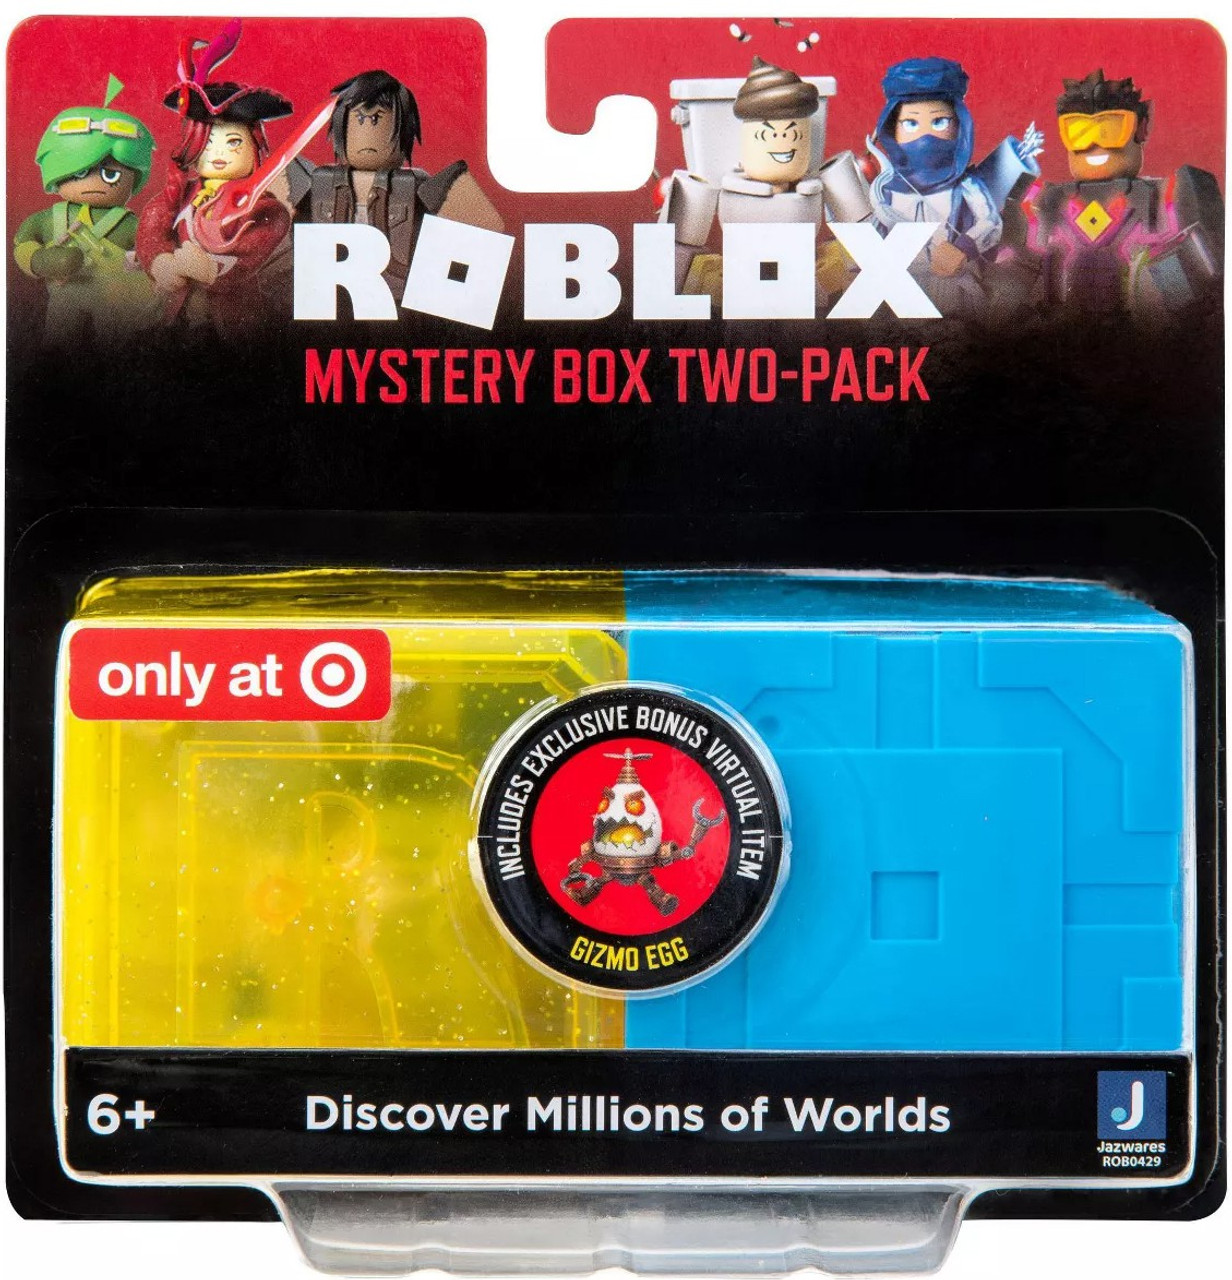 Roblox Series 9 Celebrity Series 7 Exclusive Mystery 2 Pack Easter Set Bonus Gizmo Egg Virtual Item Code Included Jazwares Toywiz - roblox persona 5 last surprise